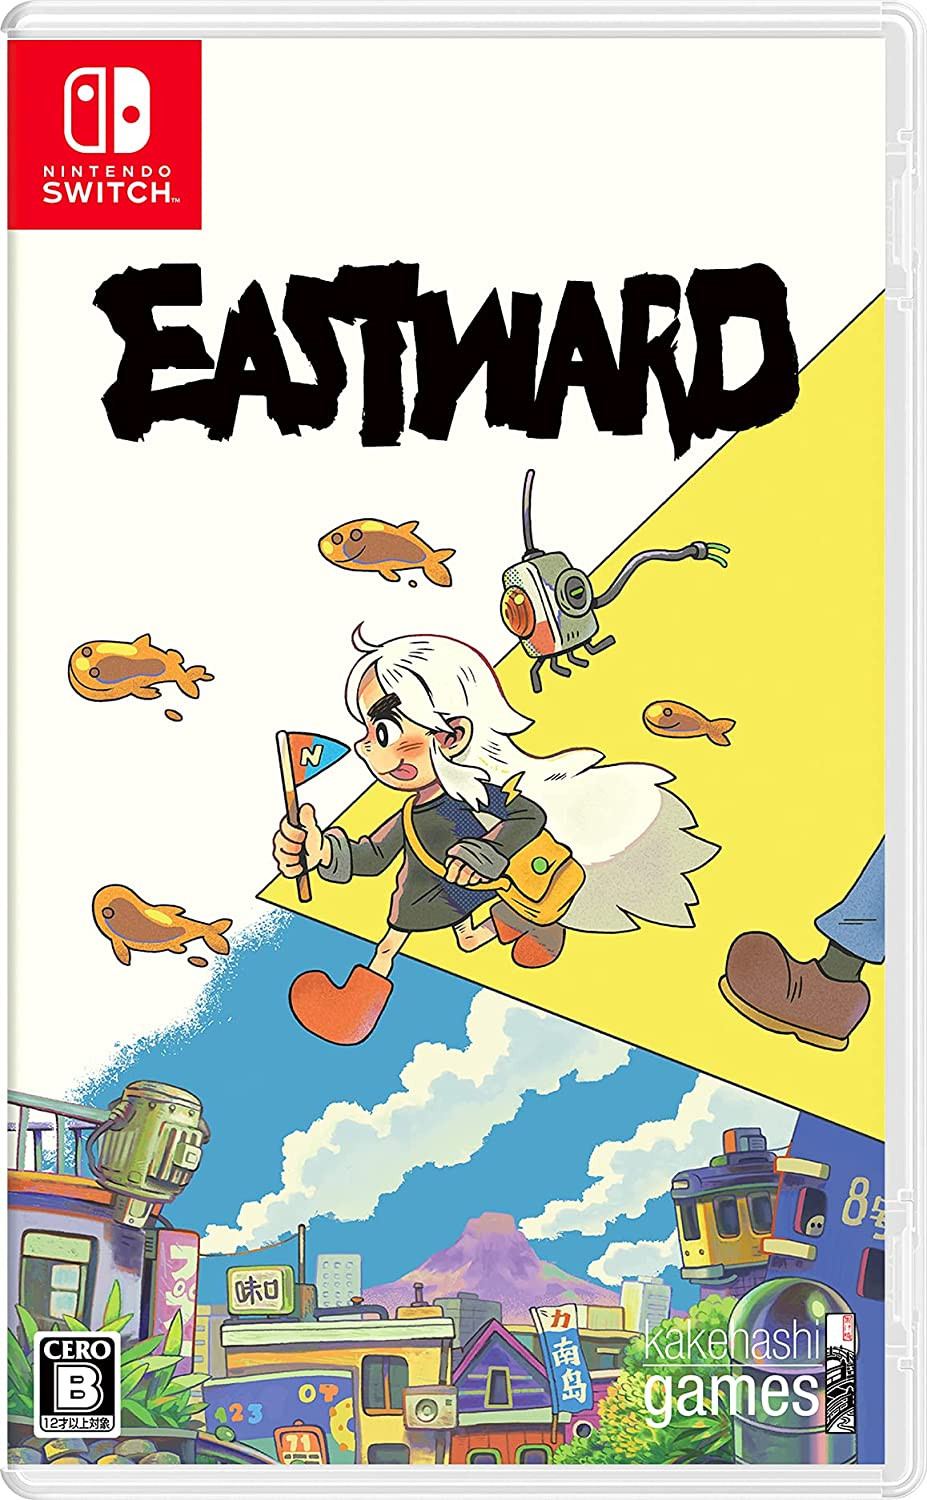 Eastward physical edition on the way – release the east!